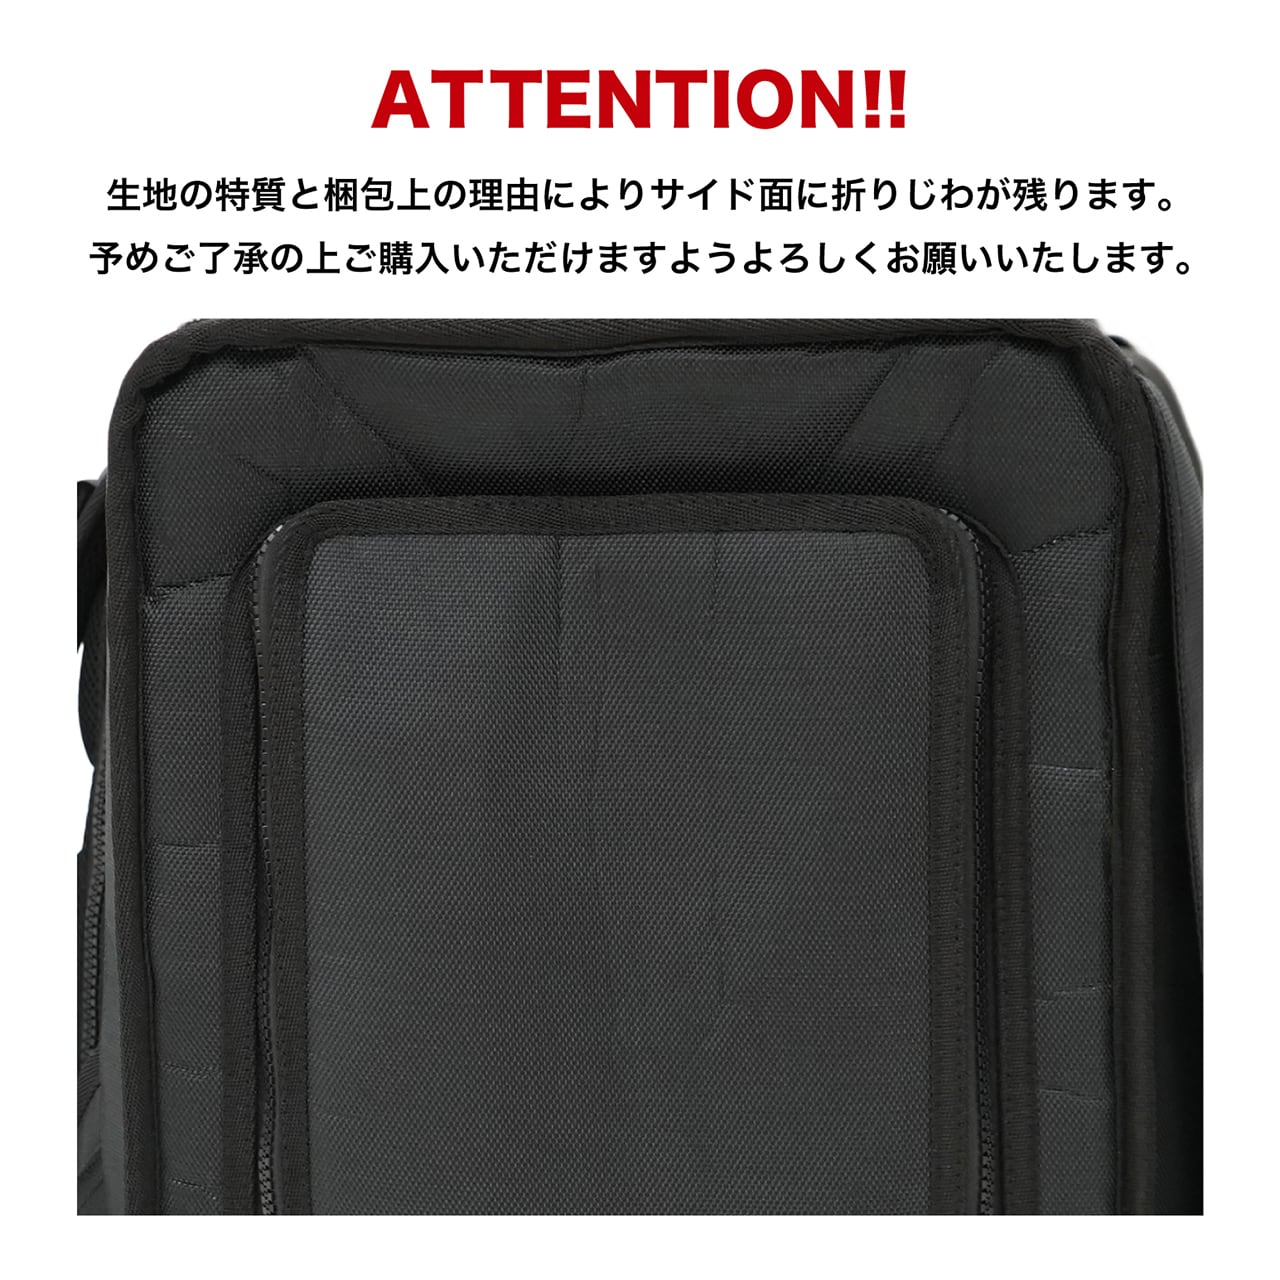 BRIXTON CARRY BACKPACK −WIDE−